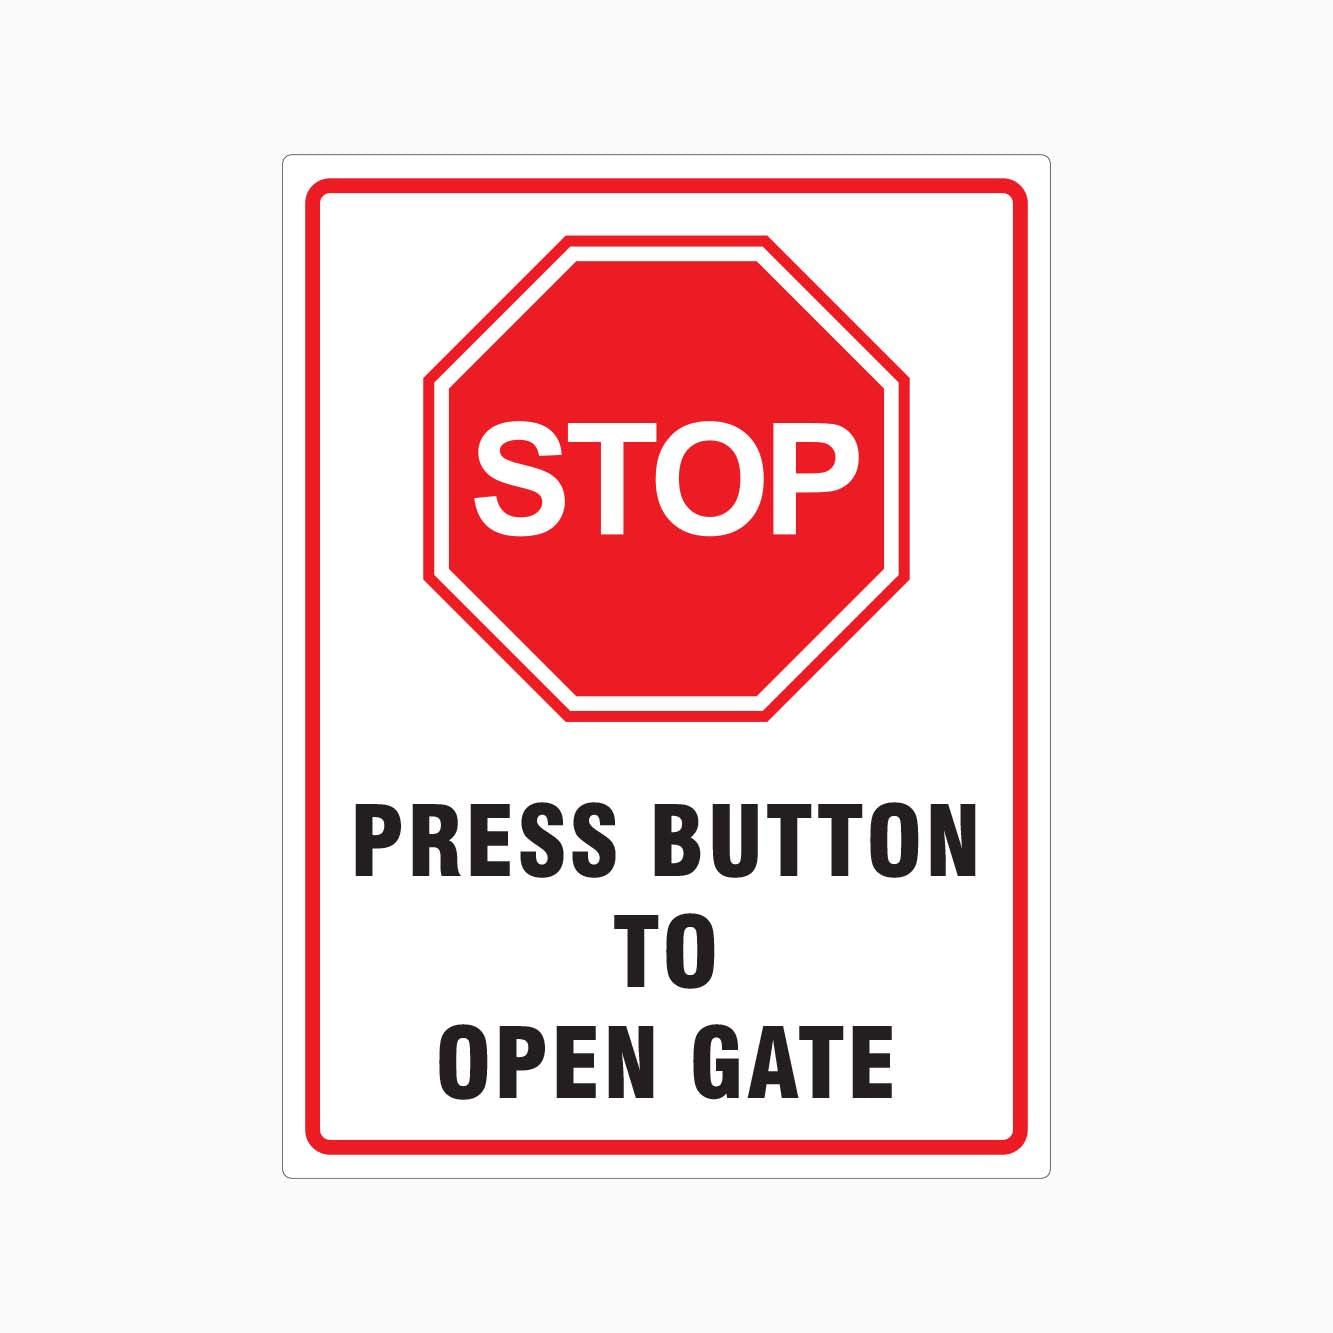 PRESS BUTTON TO OPEN GATE SIGN - GET SIGNS